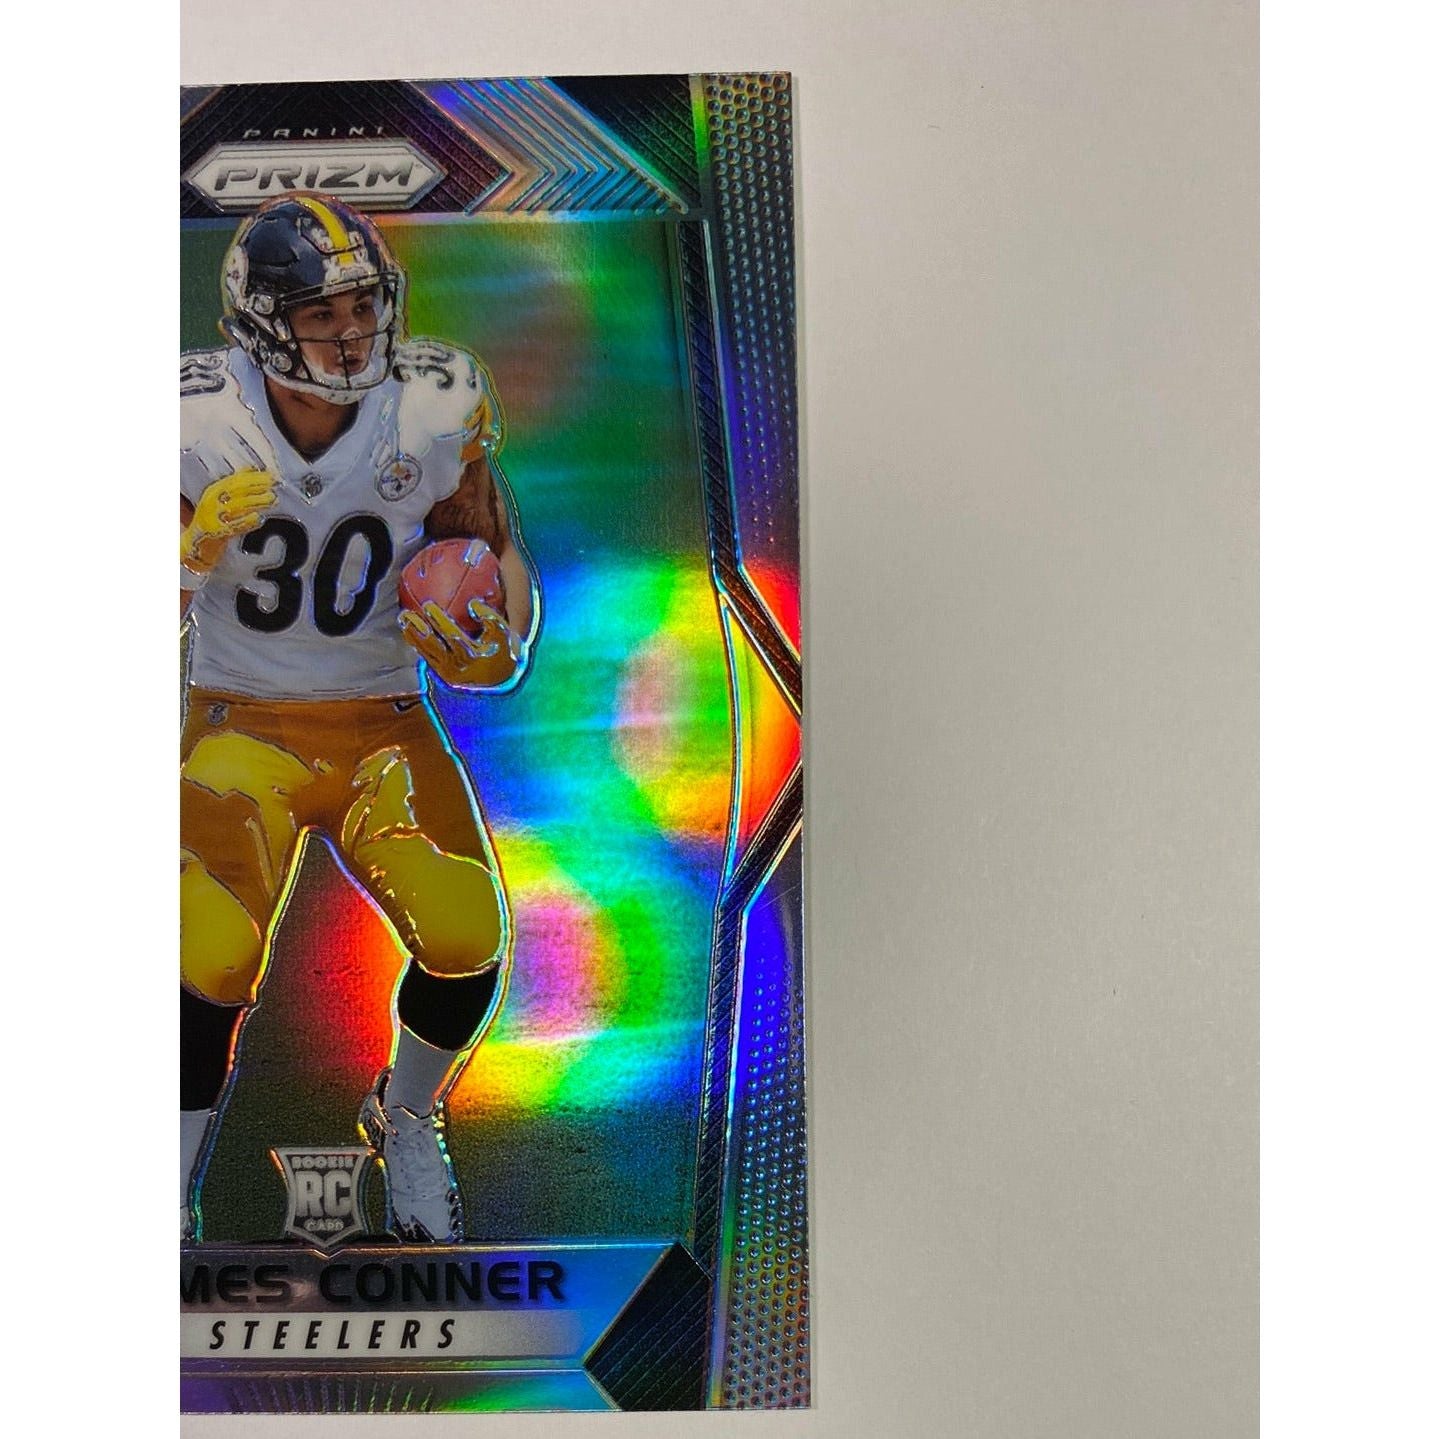  2017 Panini Prizm James Conner Silver Holo Prizm RC  Local Legends Cards & Collectibles